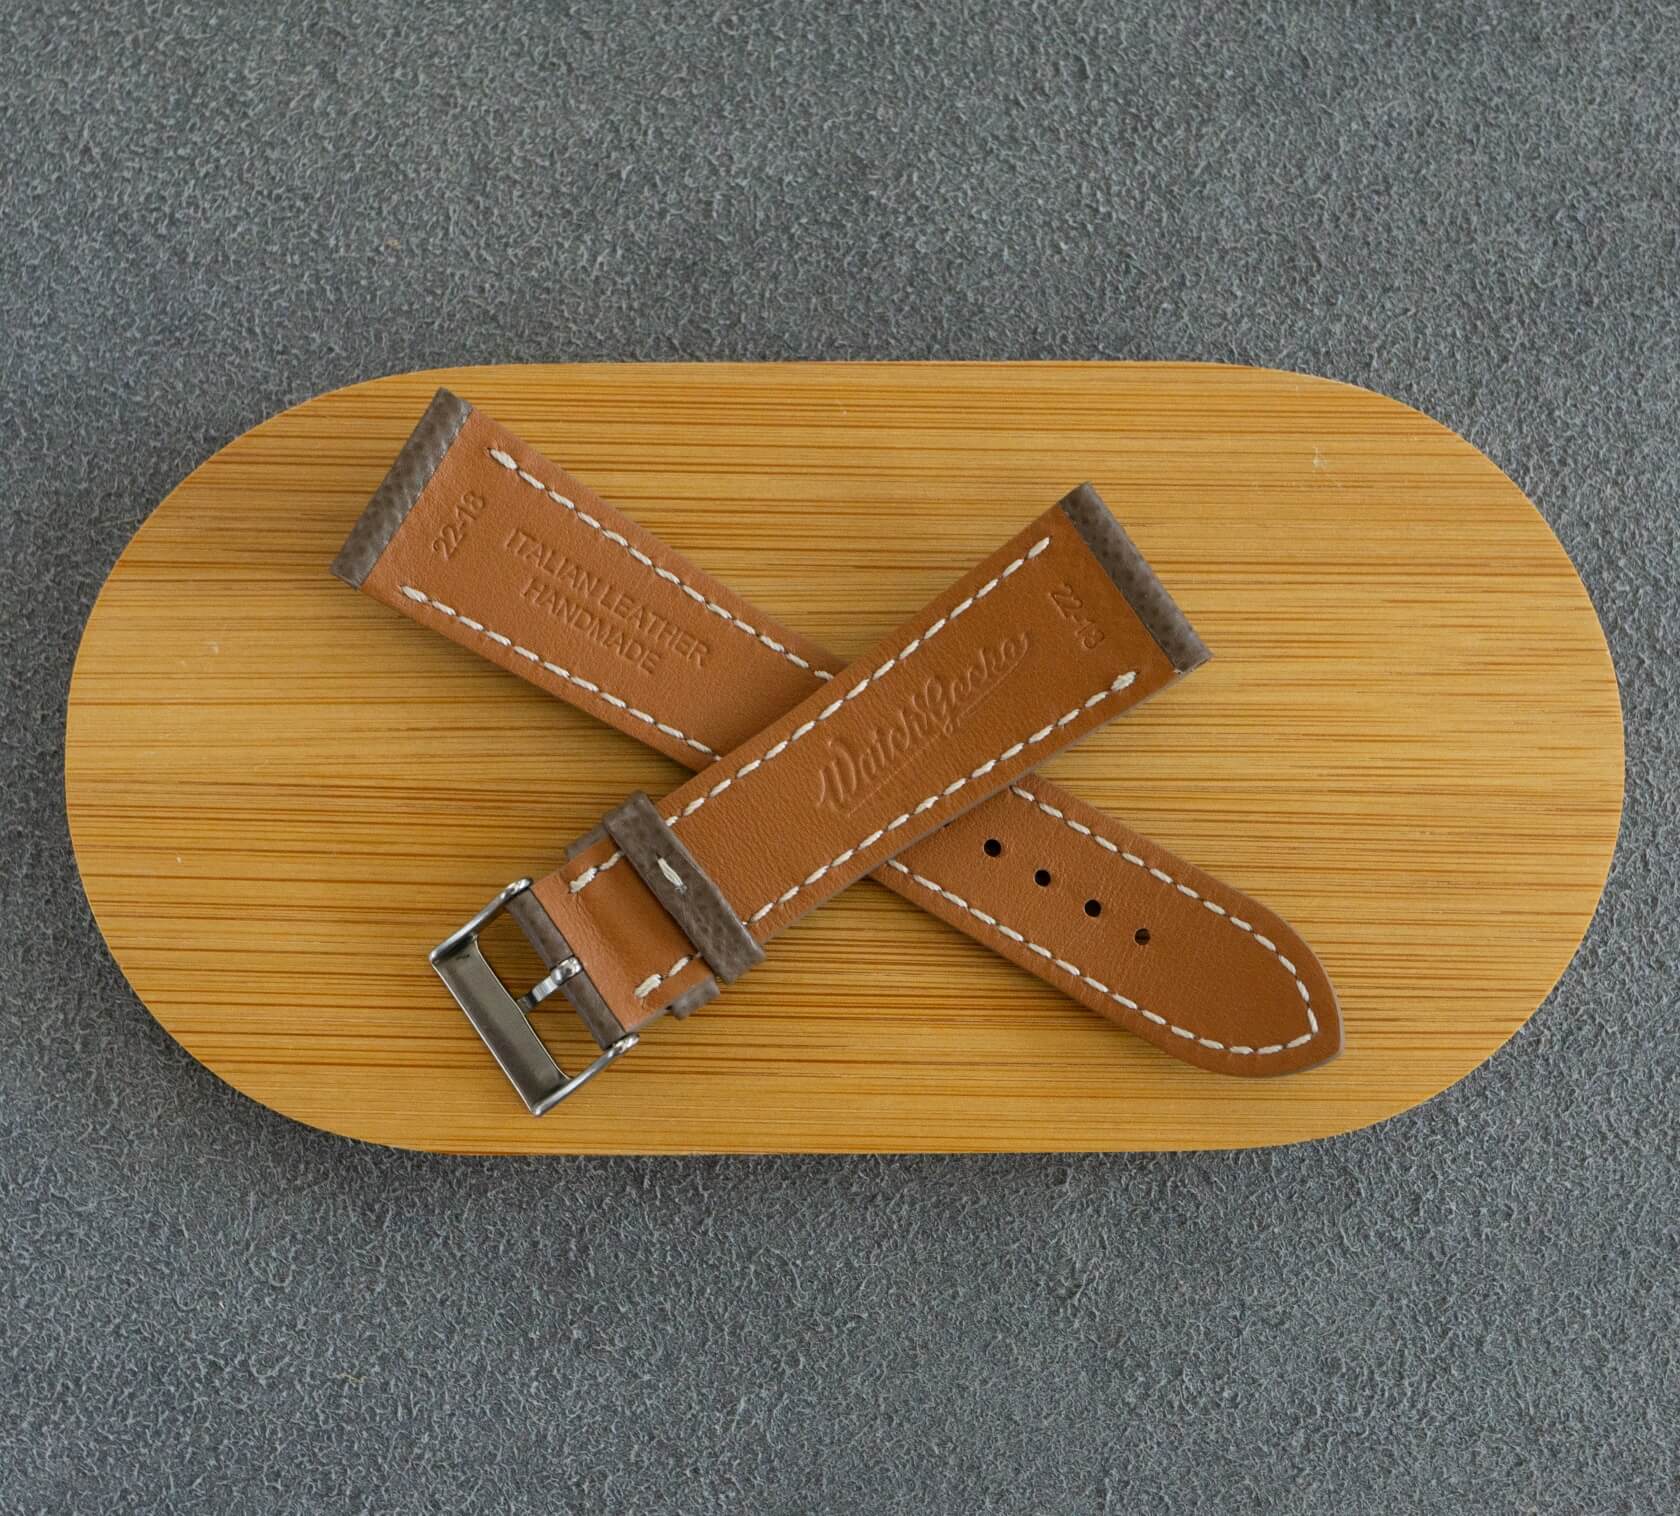 The underside of the strap is lined using honey-colored calf leather